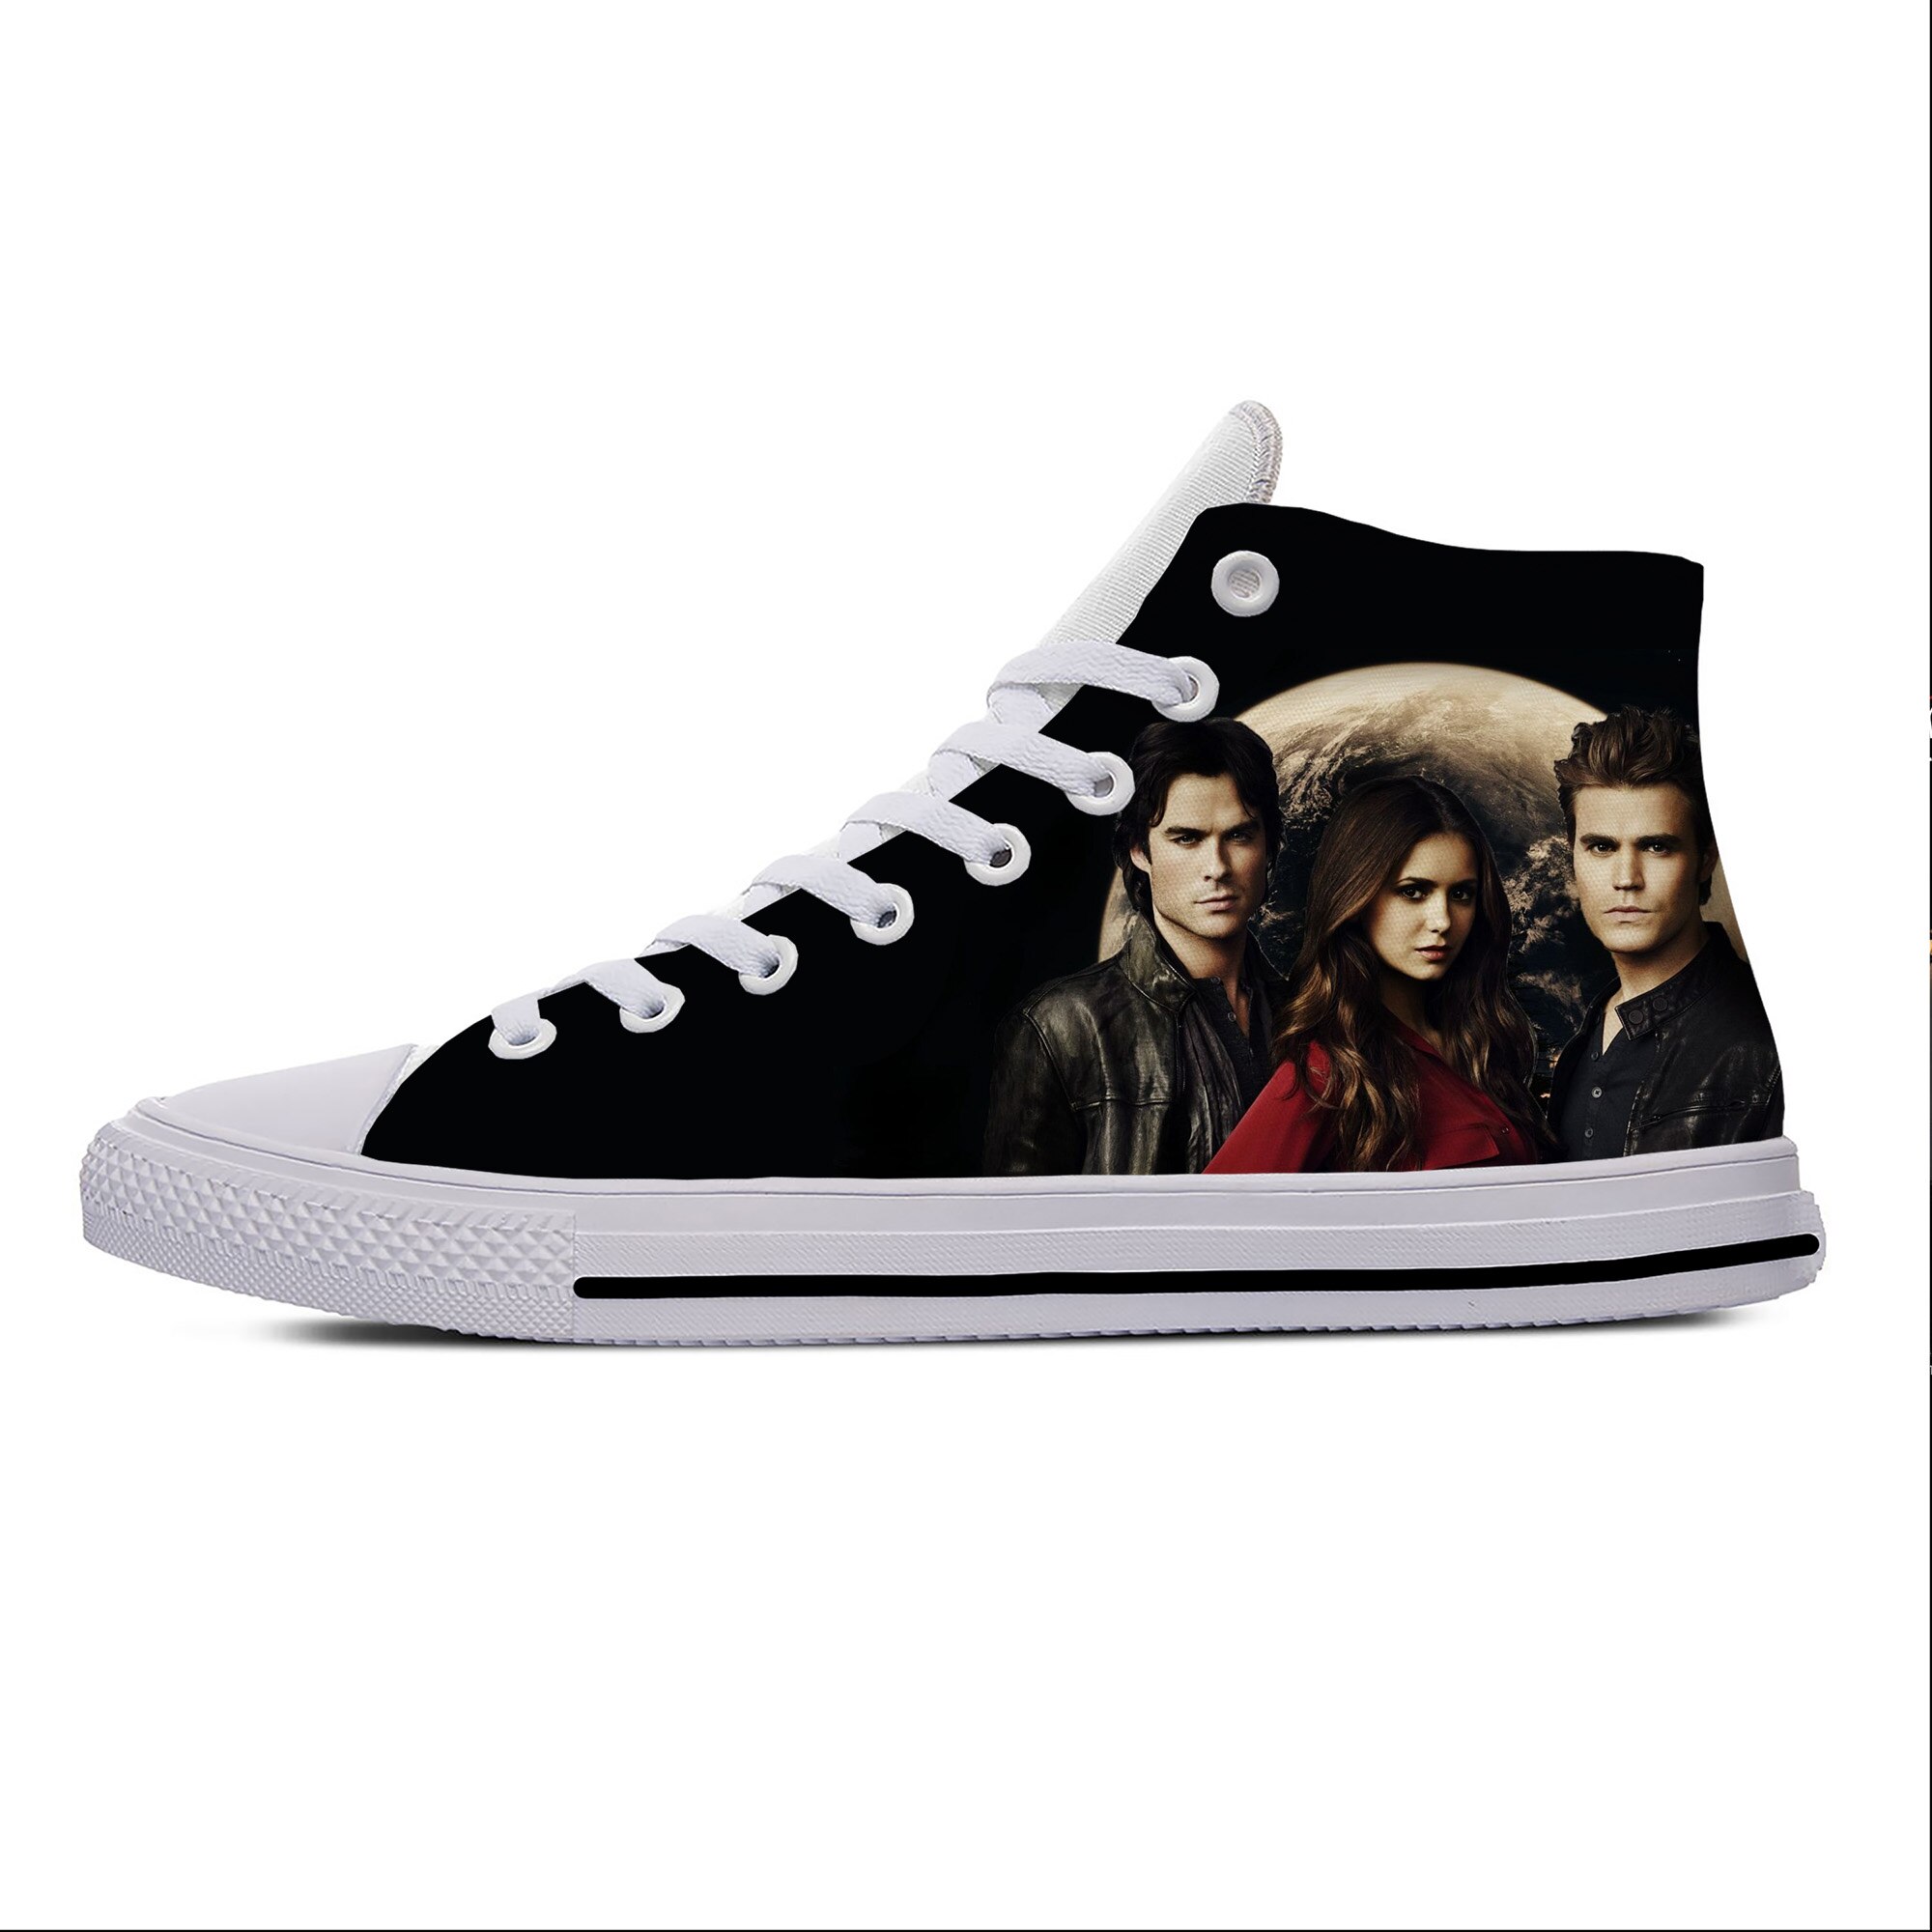 The Vampire Diaries Damon Salvatore Fashion Funny Casual Cloth Shoes High Top Lightweight Breathable 3D Print - Vampire Diaries Merch